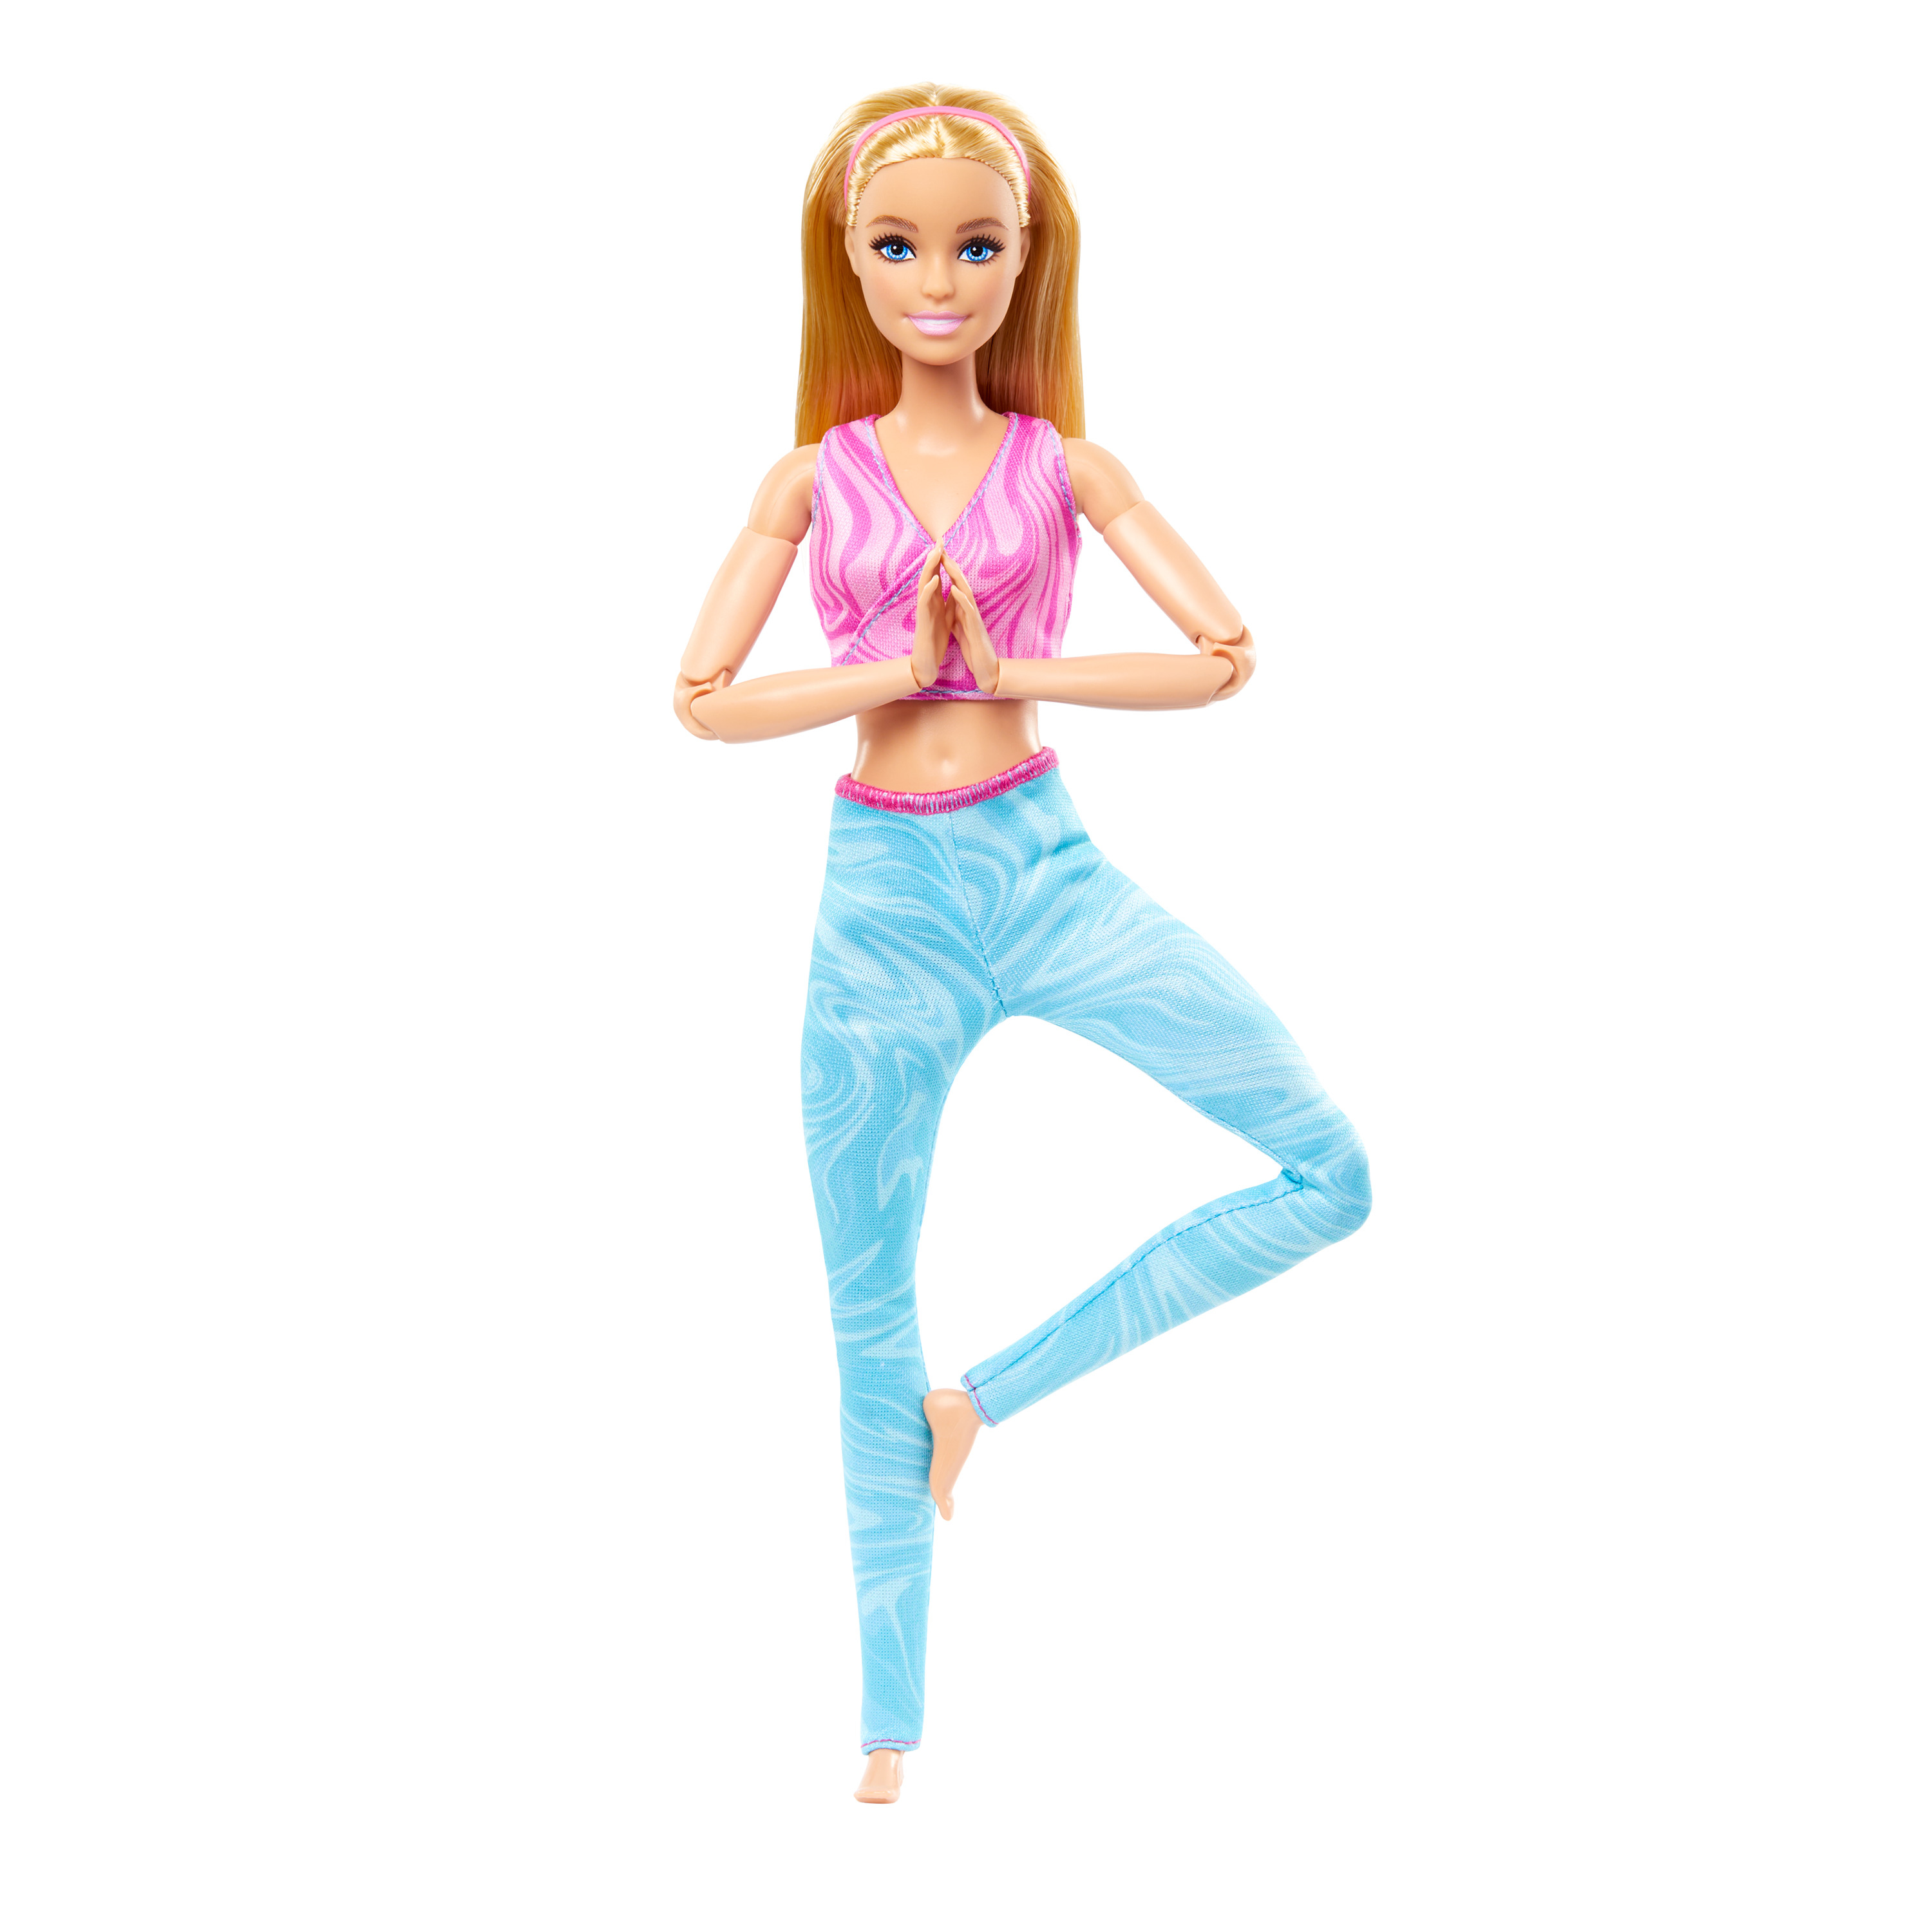 Barbie Barbie Made to Move Doll (Multicolor) : : Toys & Games